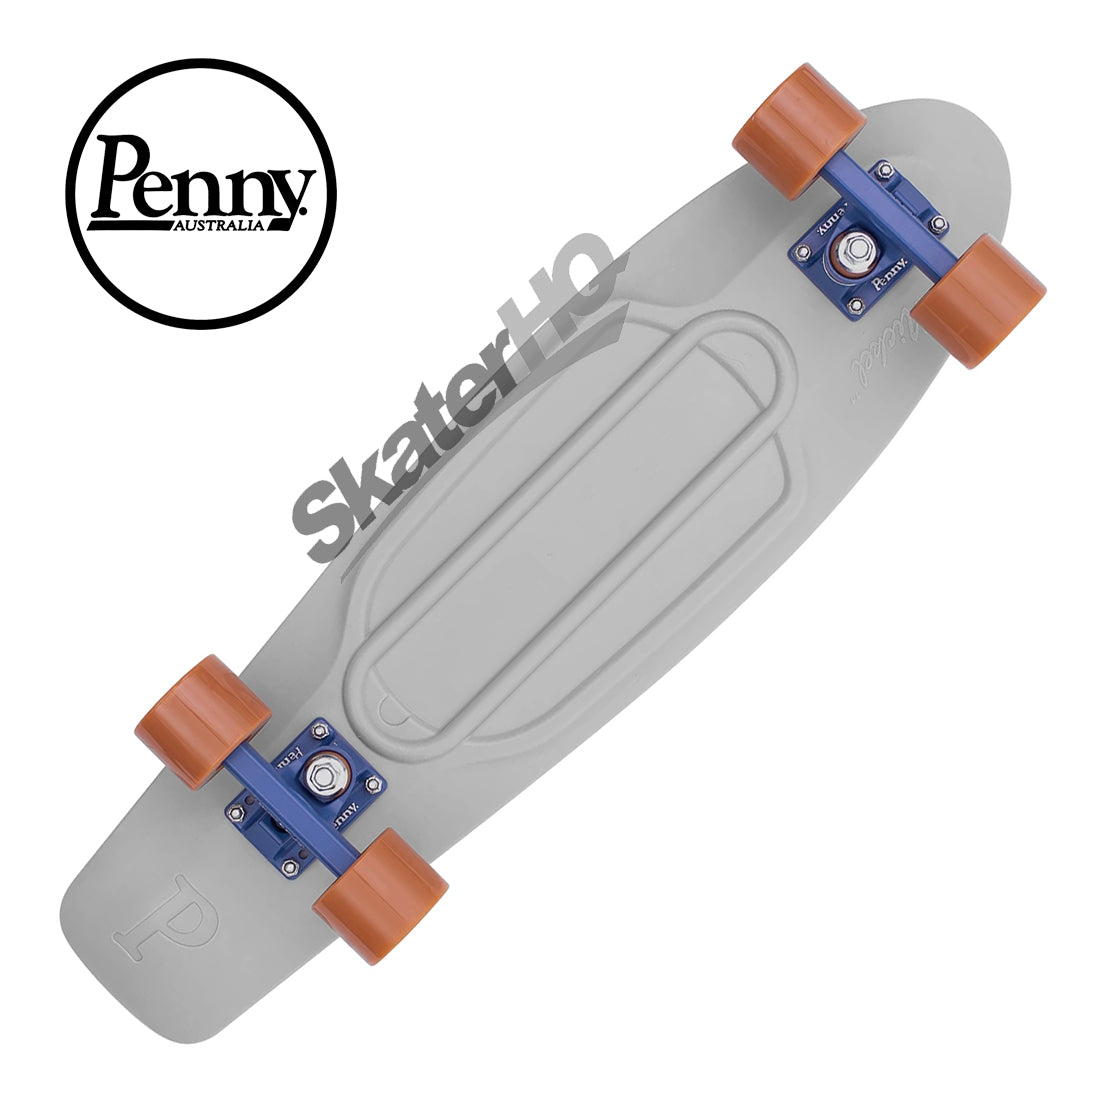 Penny 7.5x27 Nickel Complete - Stone Forest Skateboard Compl Cruisers